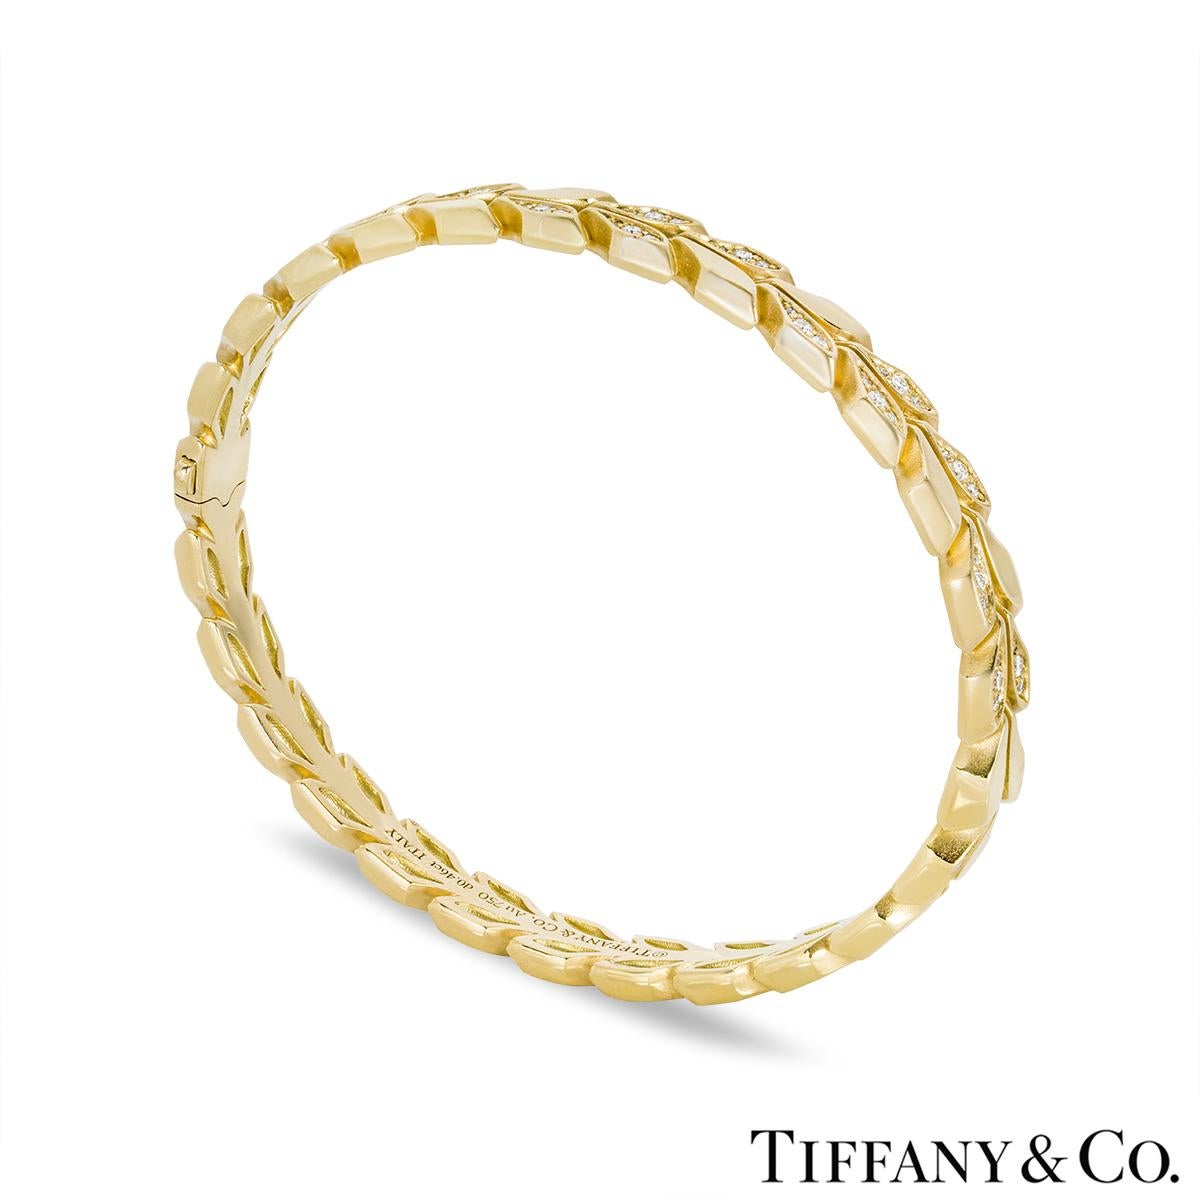 A beautiful 18k yellow gold diamond bangle by Tiffany & Co. from the Victoria Vine collection. The bracelet features a vine design throughout alternating between high polish and diamond set motifs. The 72 round brilliant cut diamonds have an